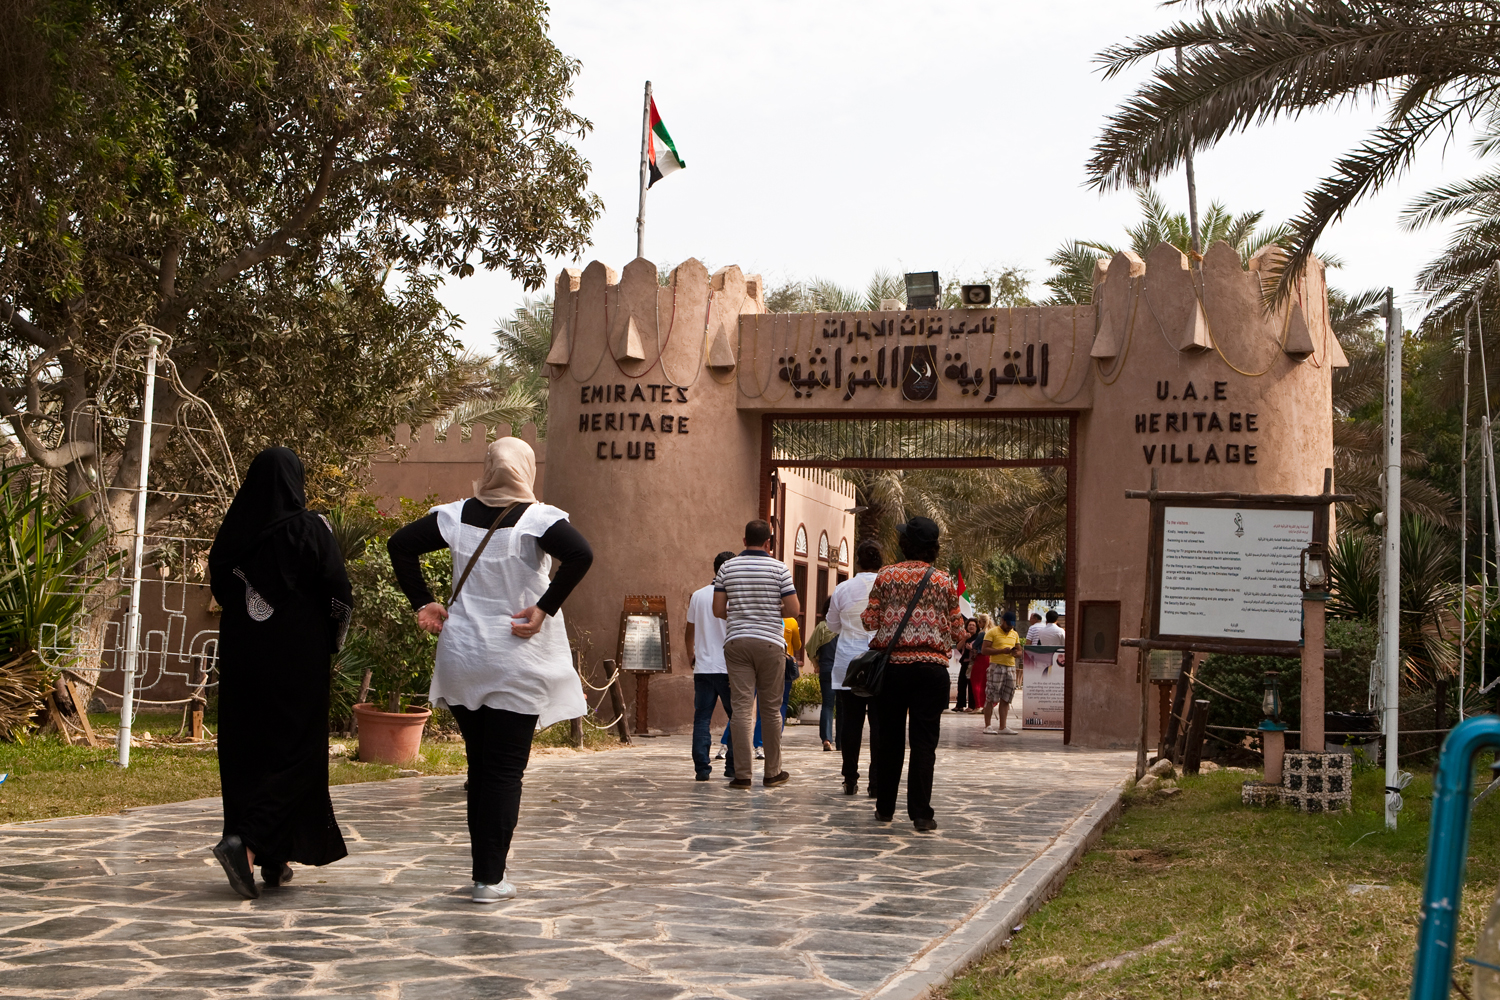 Abu Dhabi Heritage Village: How to get there, where it is, how much it costs and more | Time Out Abu Dhabi